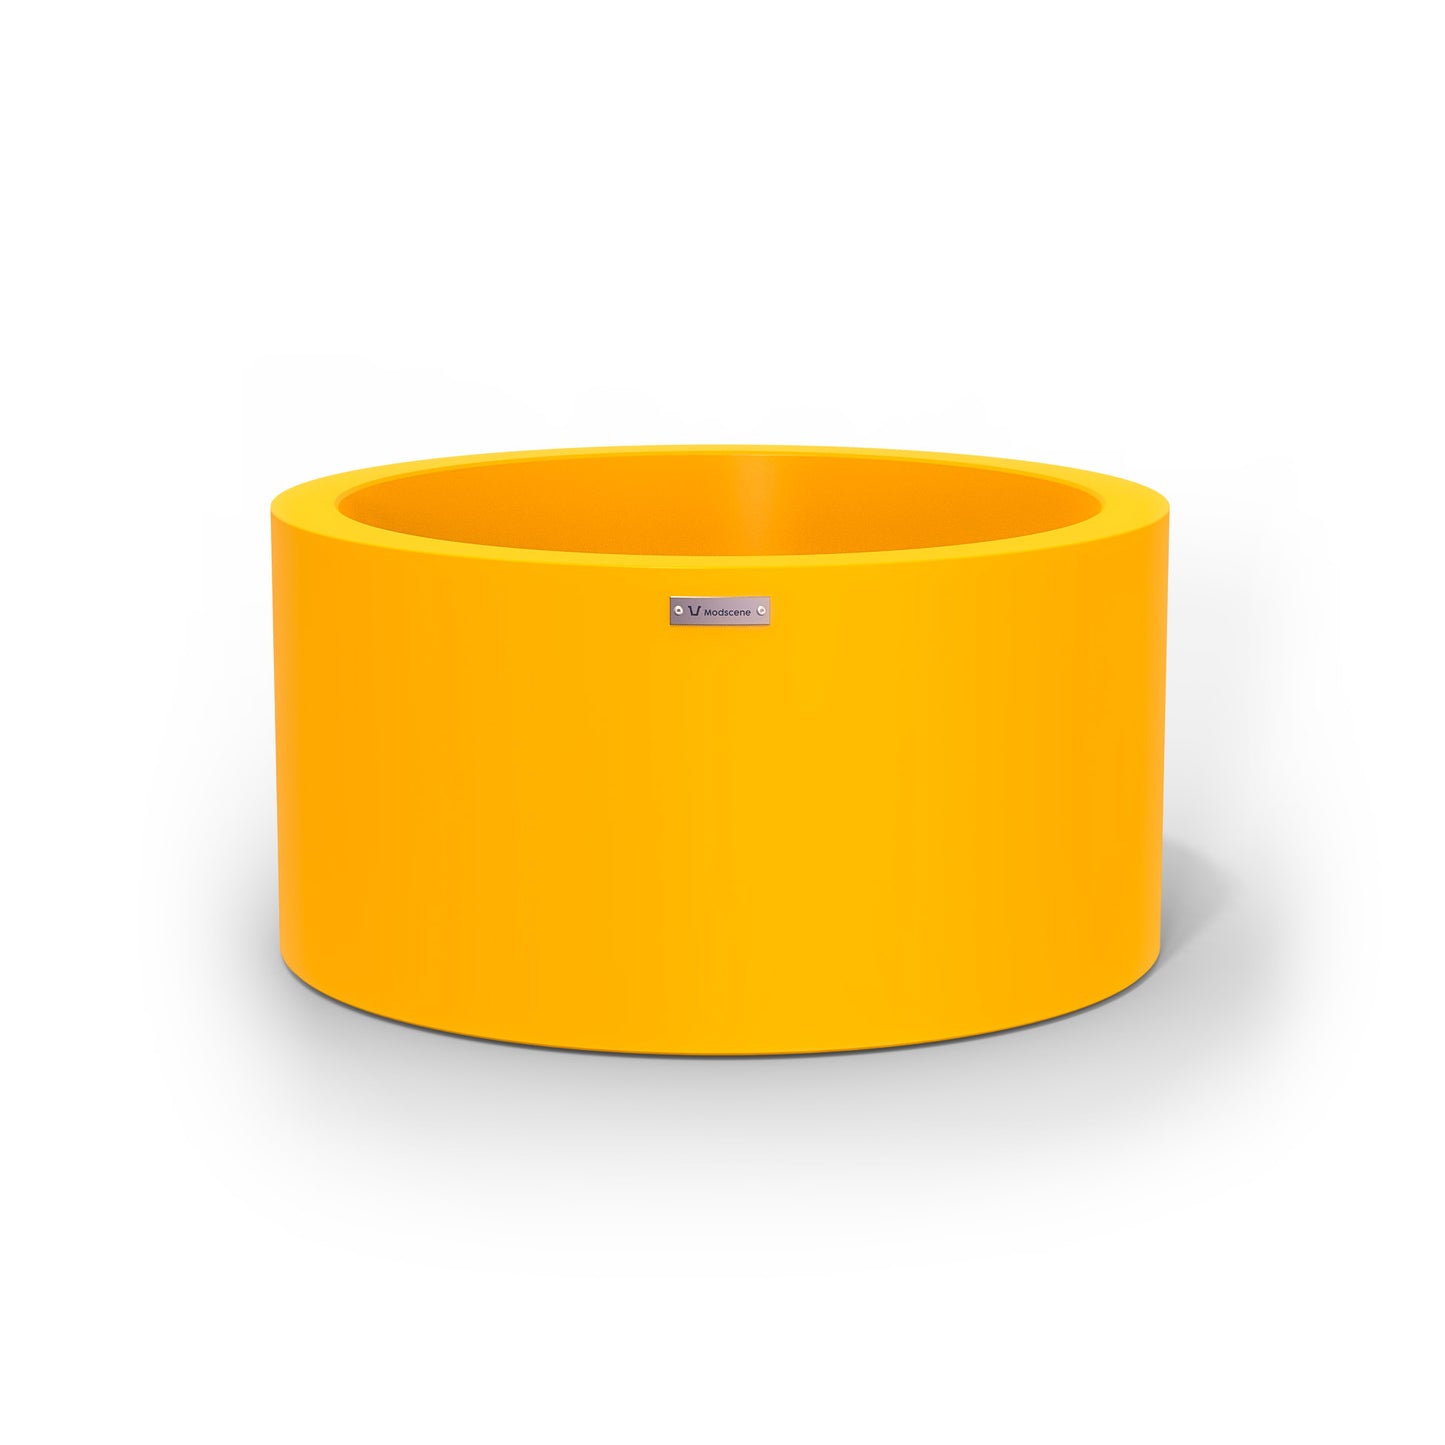 A medium cylinder shaped pot planter in yellow made by Modscene NZ. 